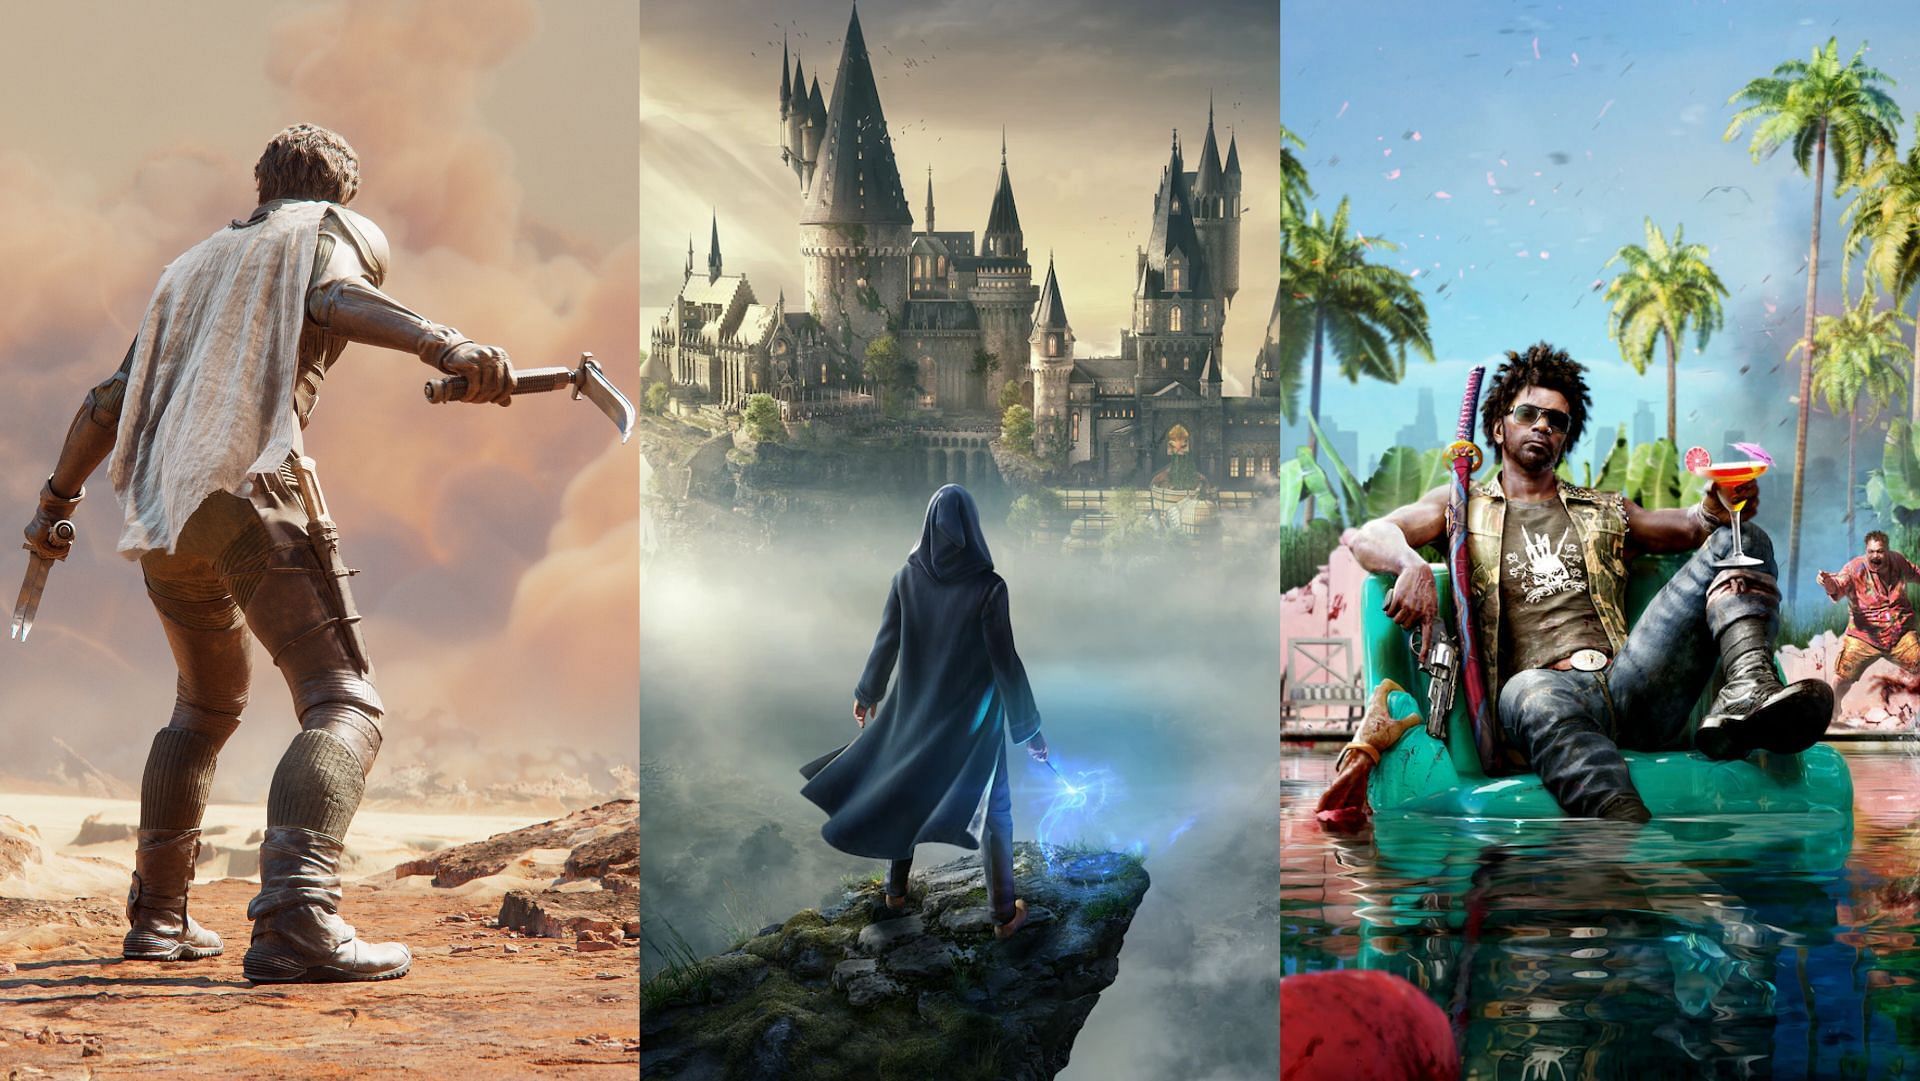 Some of the biggest announcements made during Gamescom